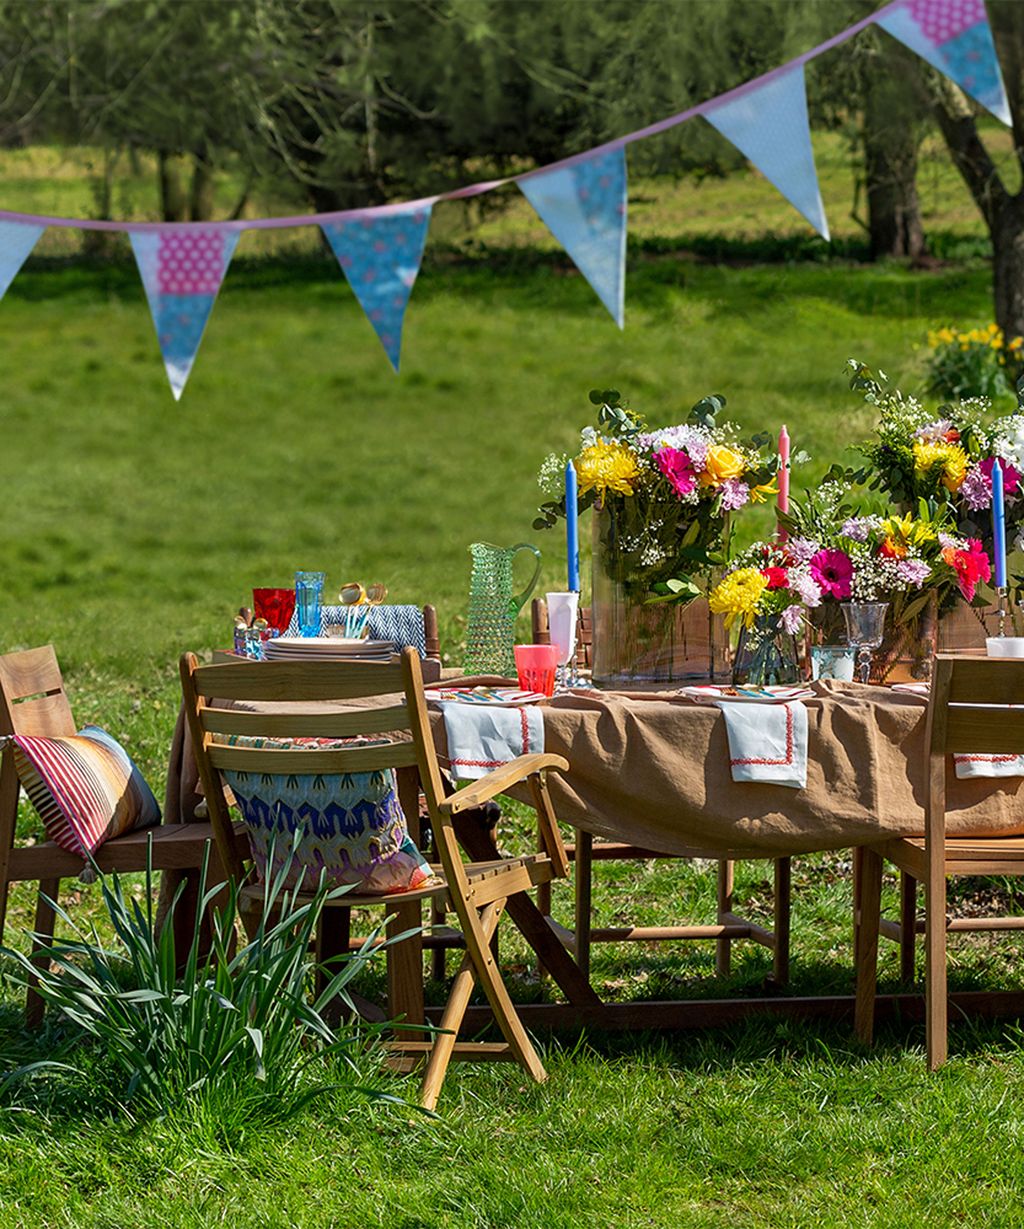 outdoor-birthday-party-ideas-13-options-for-fun-festivities